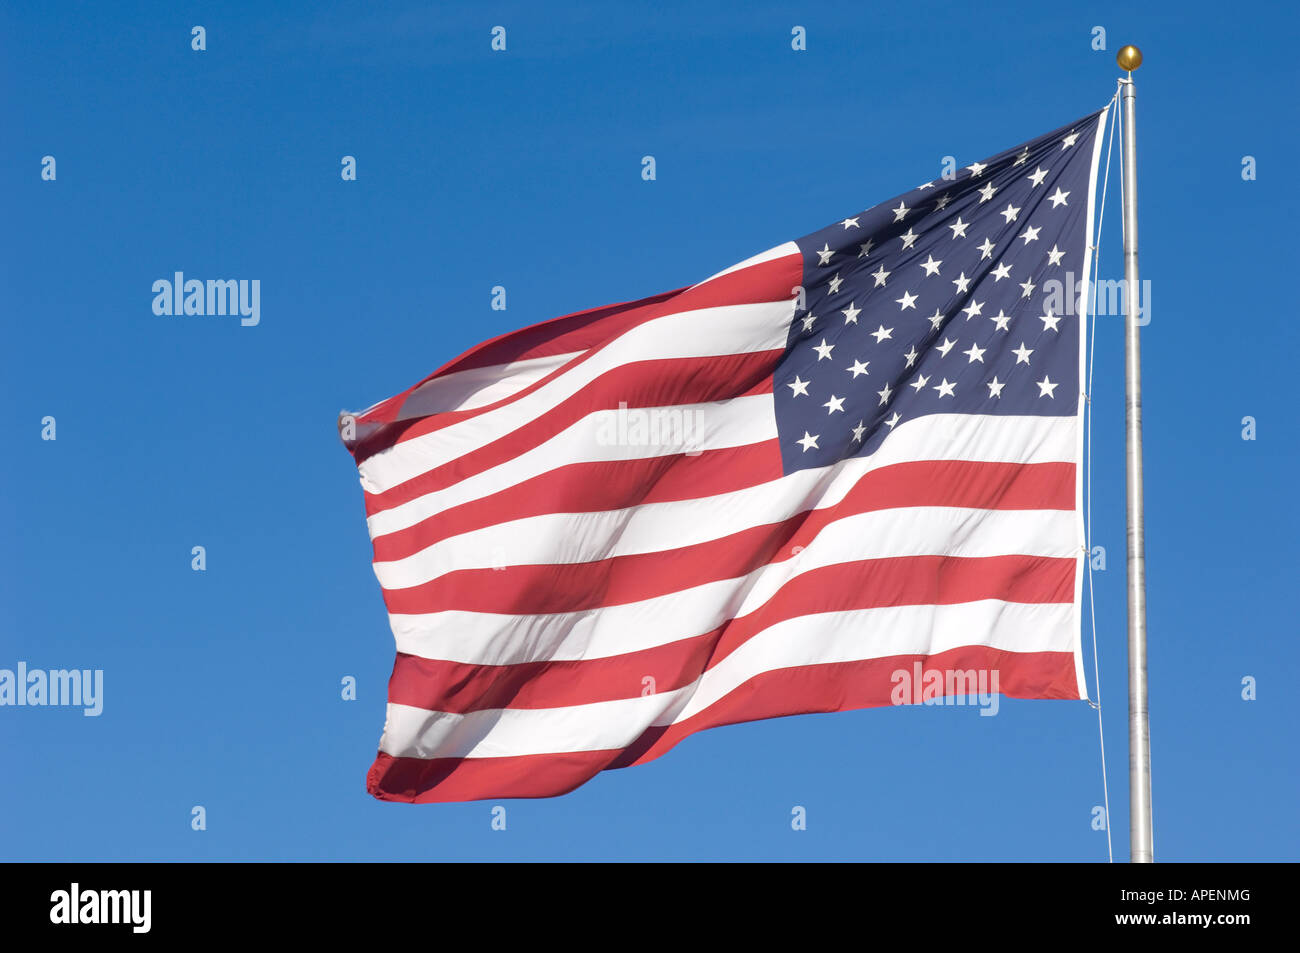 The American flag blows in the breeze. Stock Photo